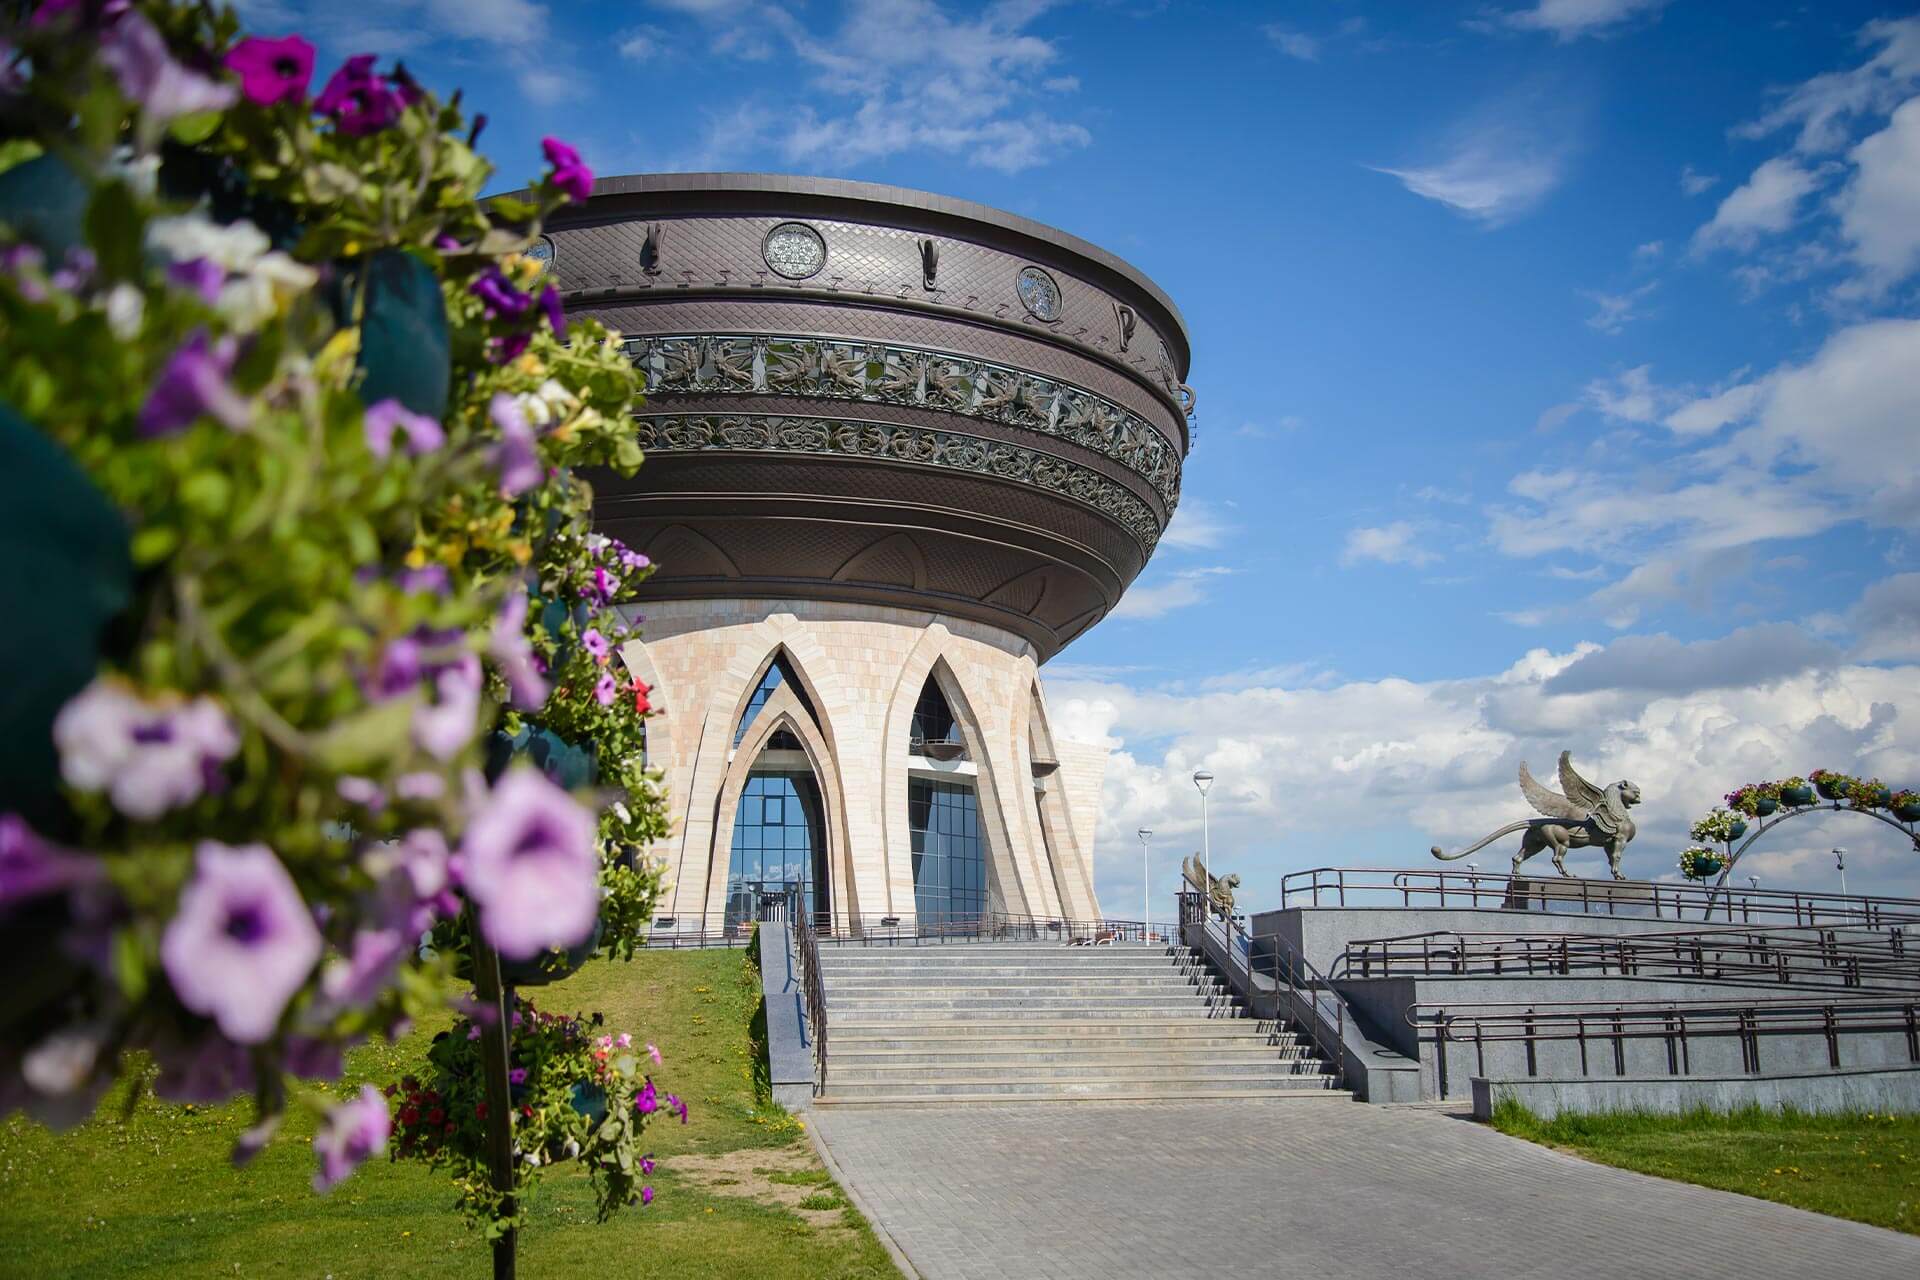 Round building of an unusual architectural style. The base of the building with gothic arch shaped windows. The top is in shape of a bowl or a copper. Flowers in front of the building